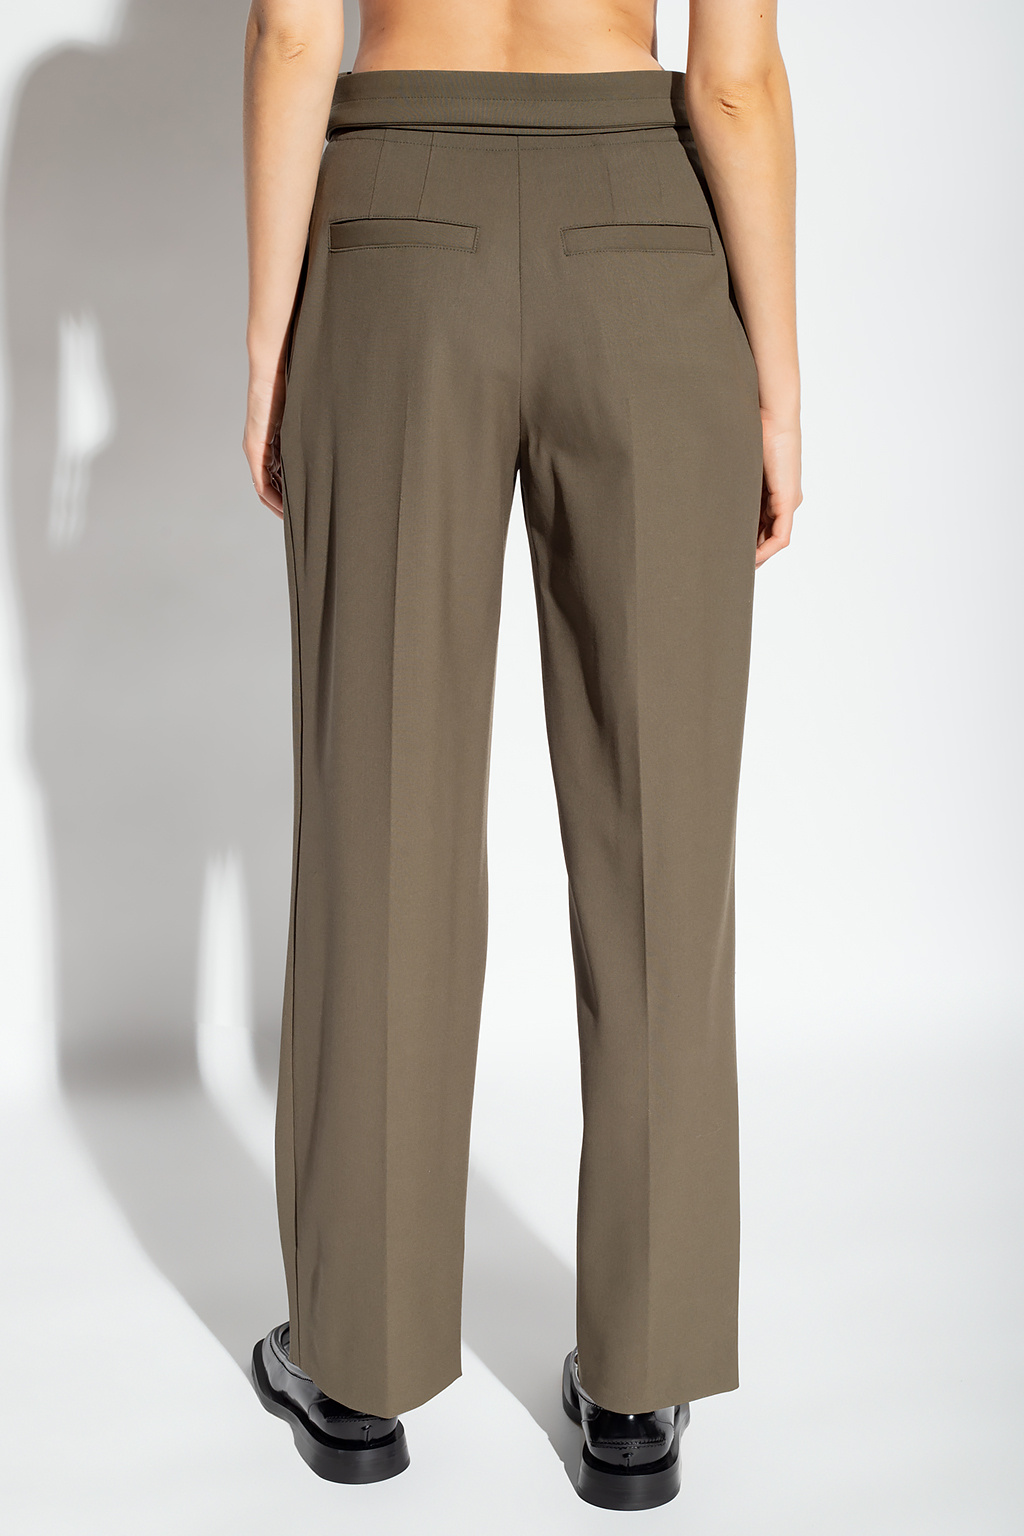 Proenza Schouler Trousers with tie detail